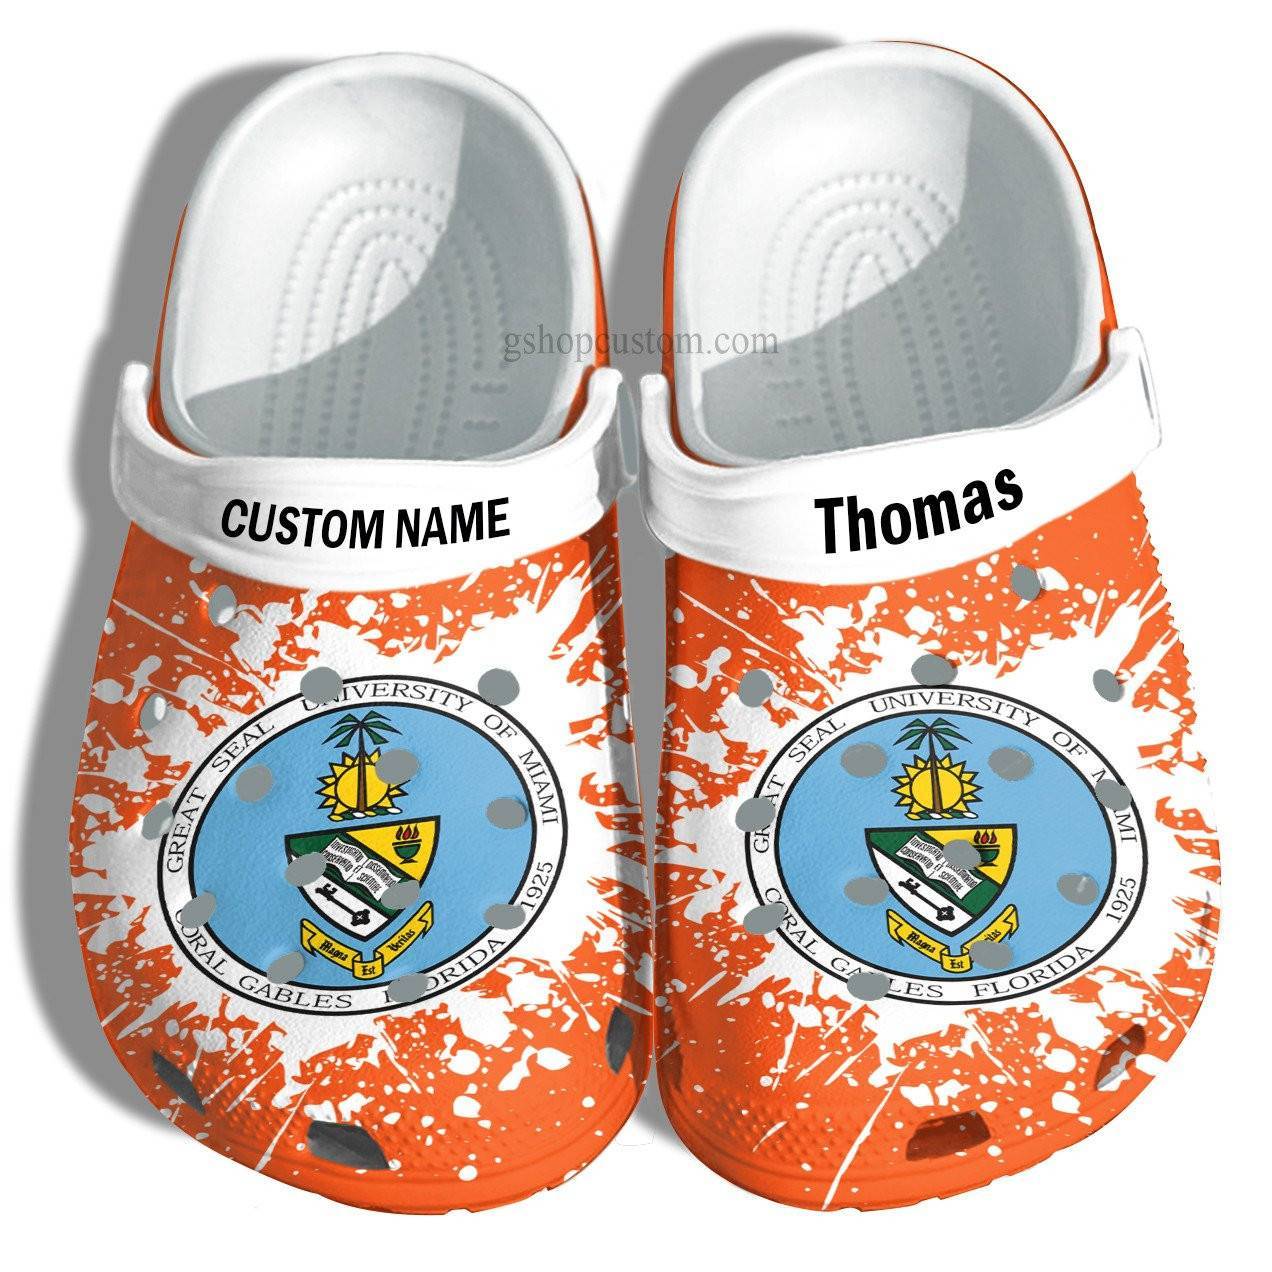 University Of Miami Graduation Gifts Croc Shoes Customize – Admission Gift Crocss Shoes